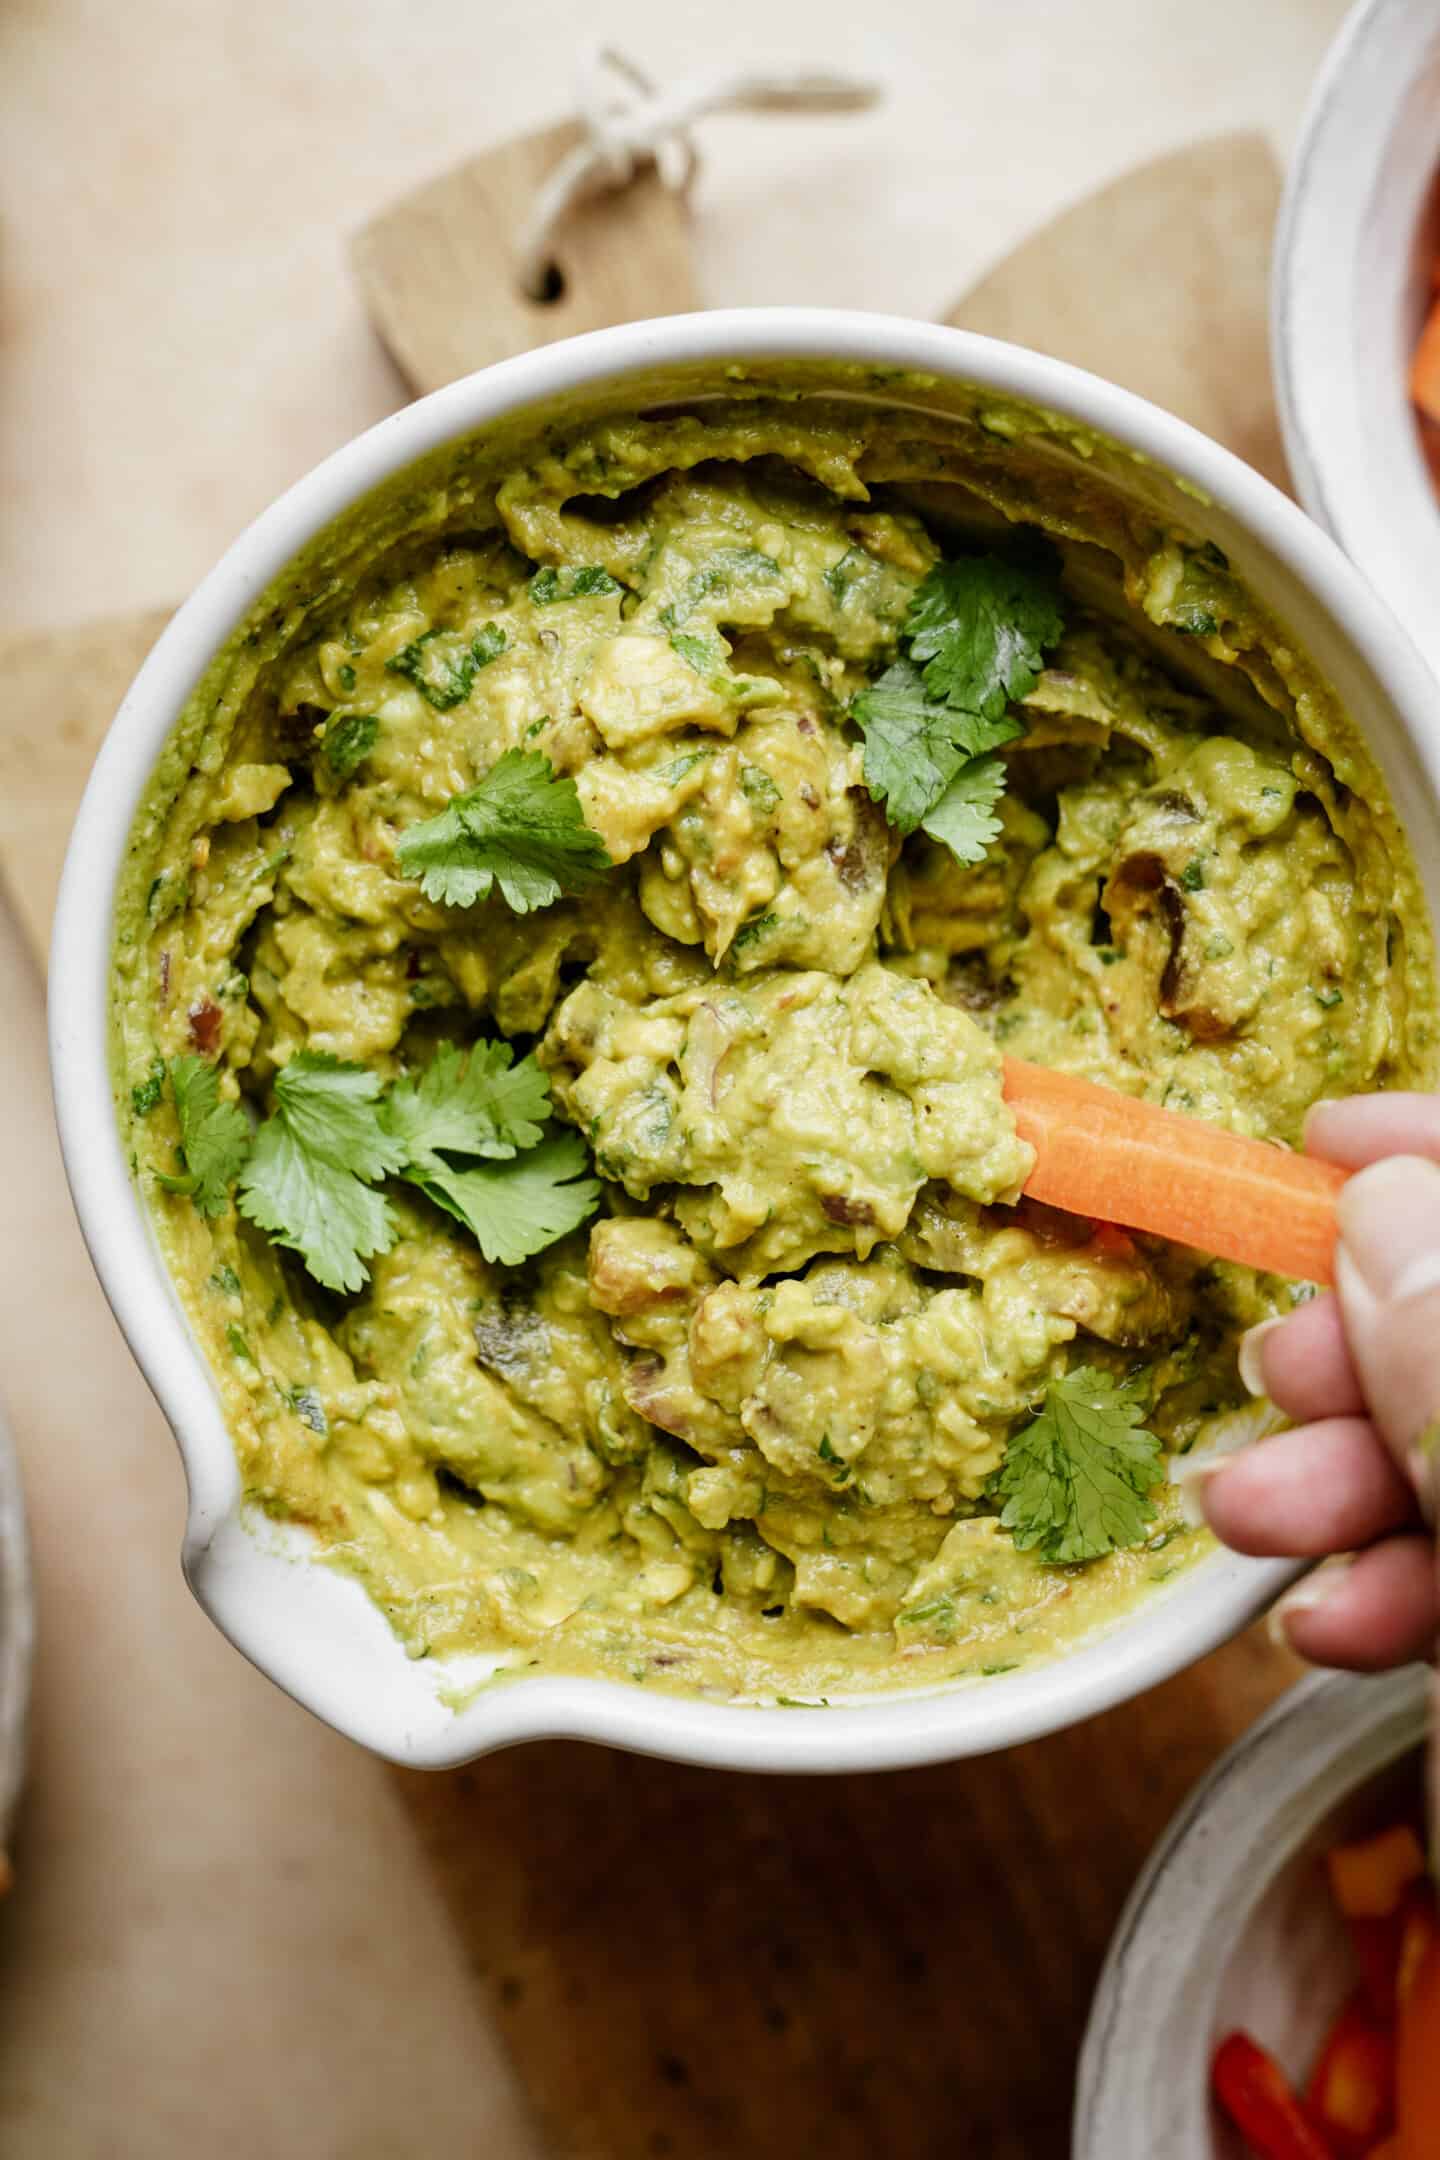 A big bowl of guacamole with a carrot dipping into it